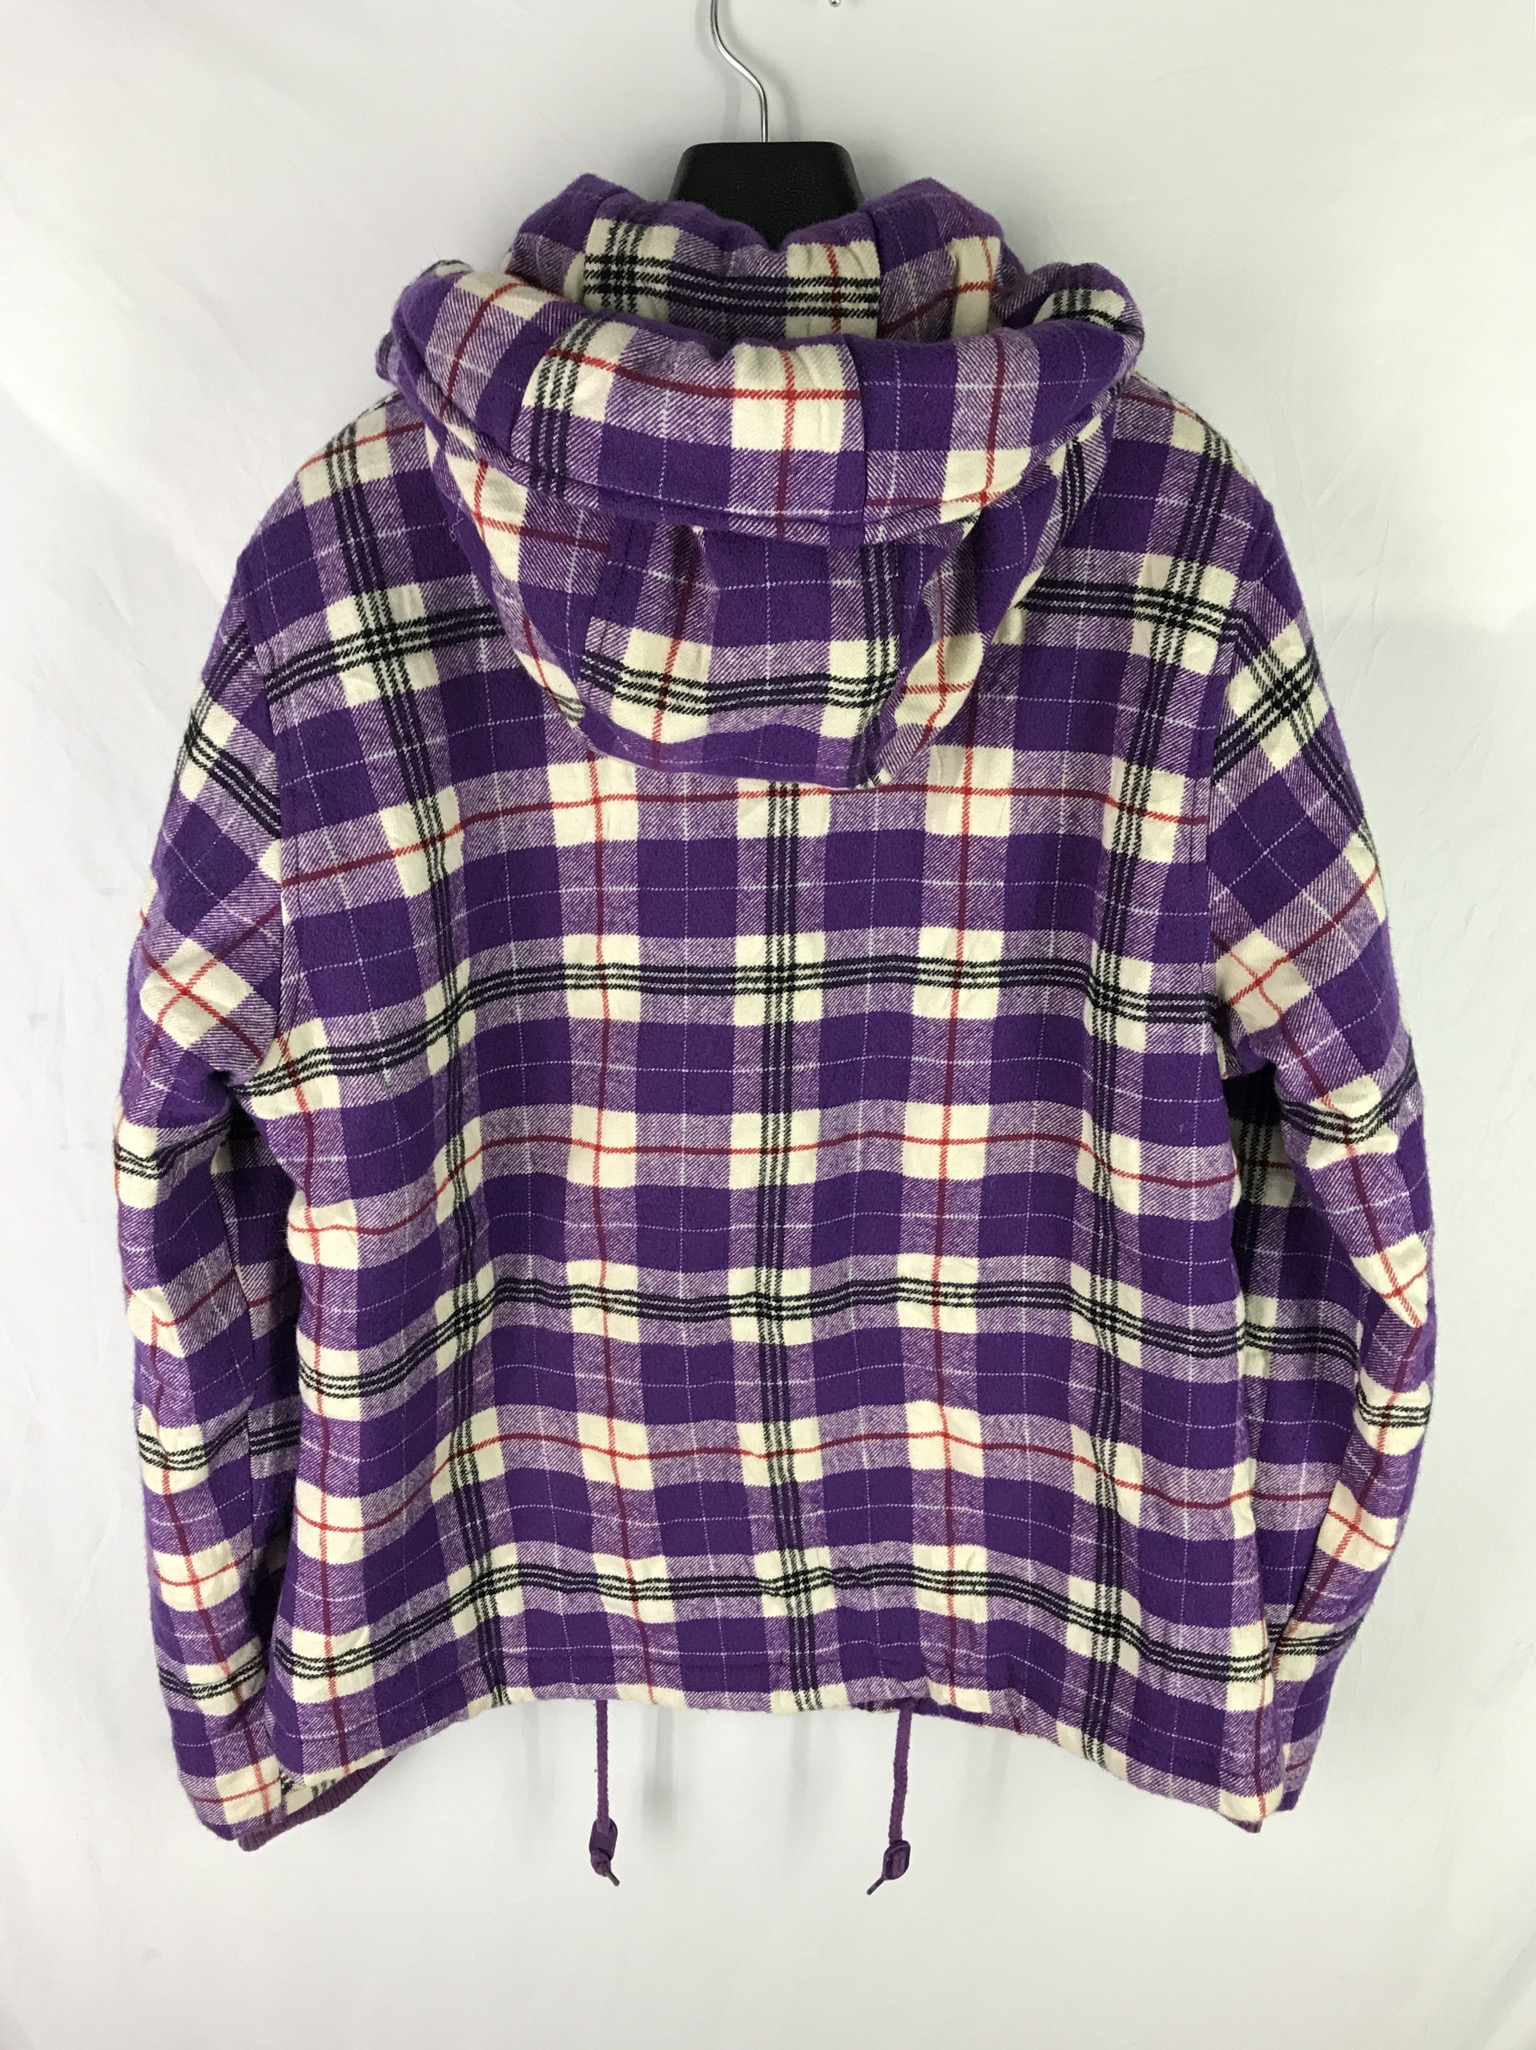 ADIDAS Plaid Checked Outerwear Duffle Coat Hoodie - 13